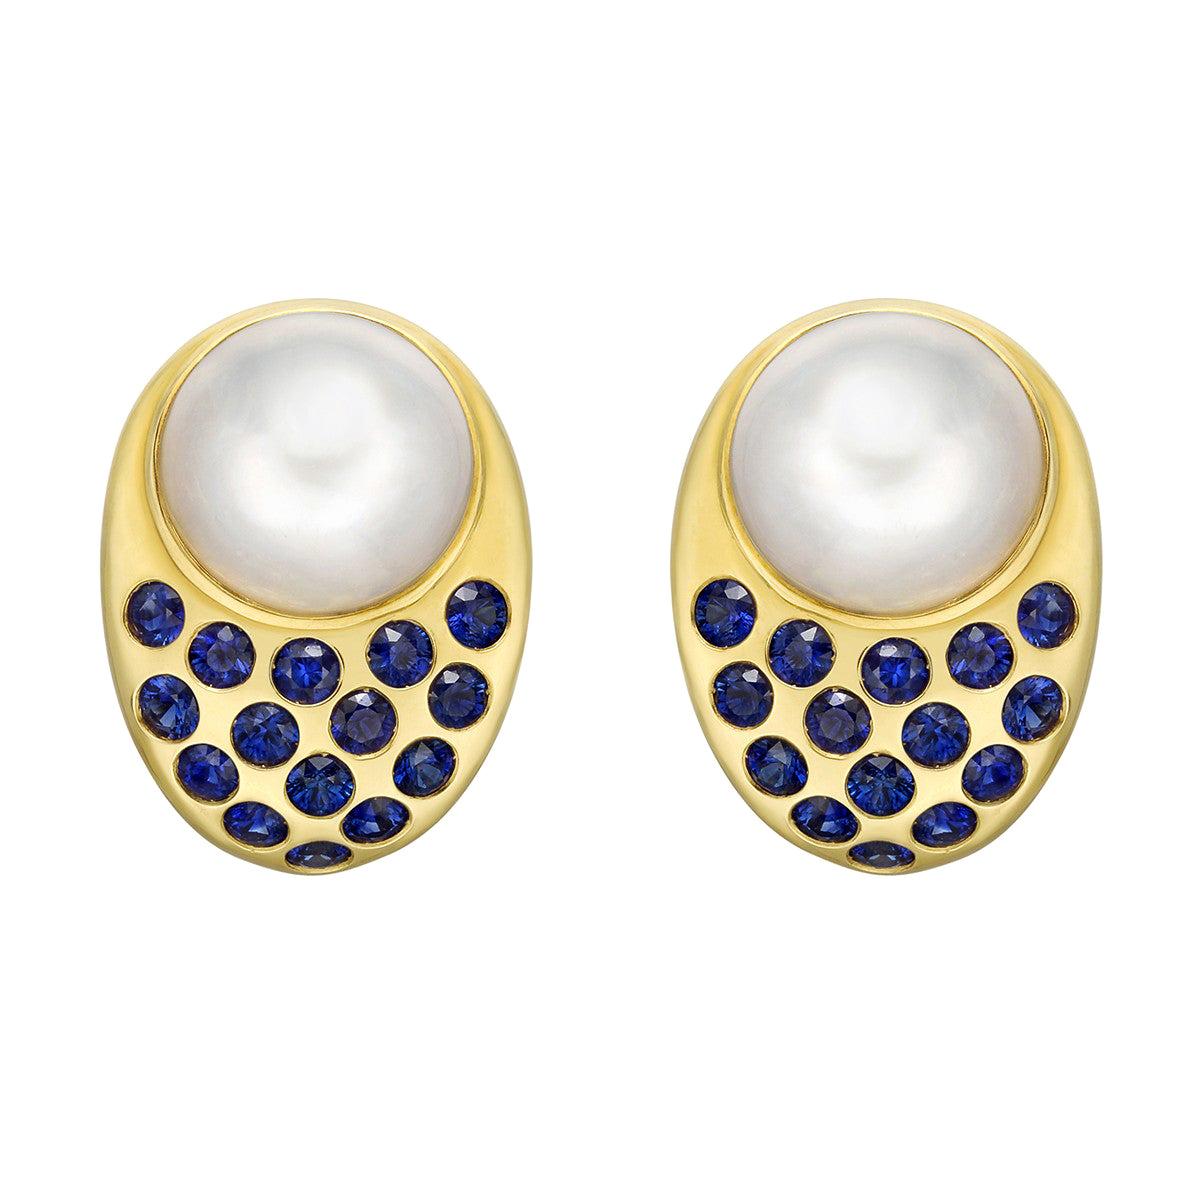 Peggy Guinness Mabe Pearl and Sapphire "Coco" Earrings